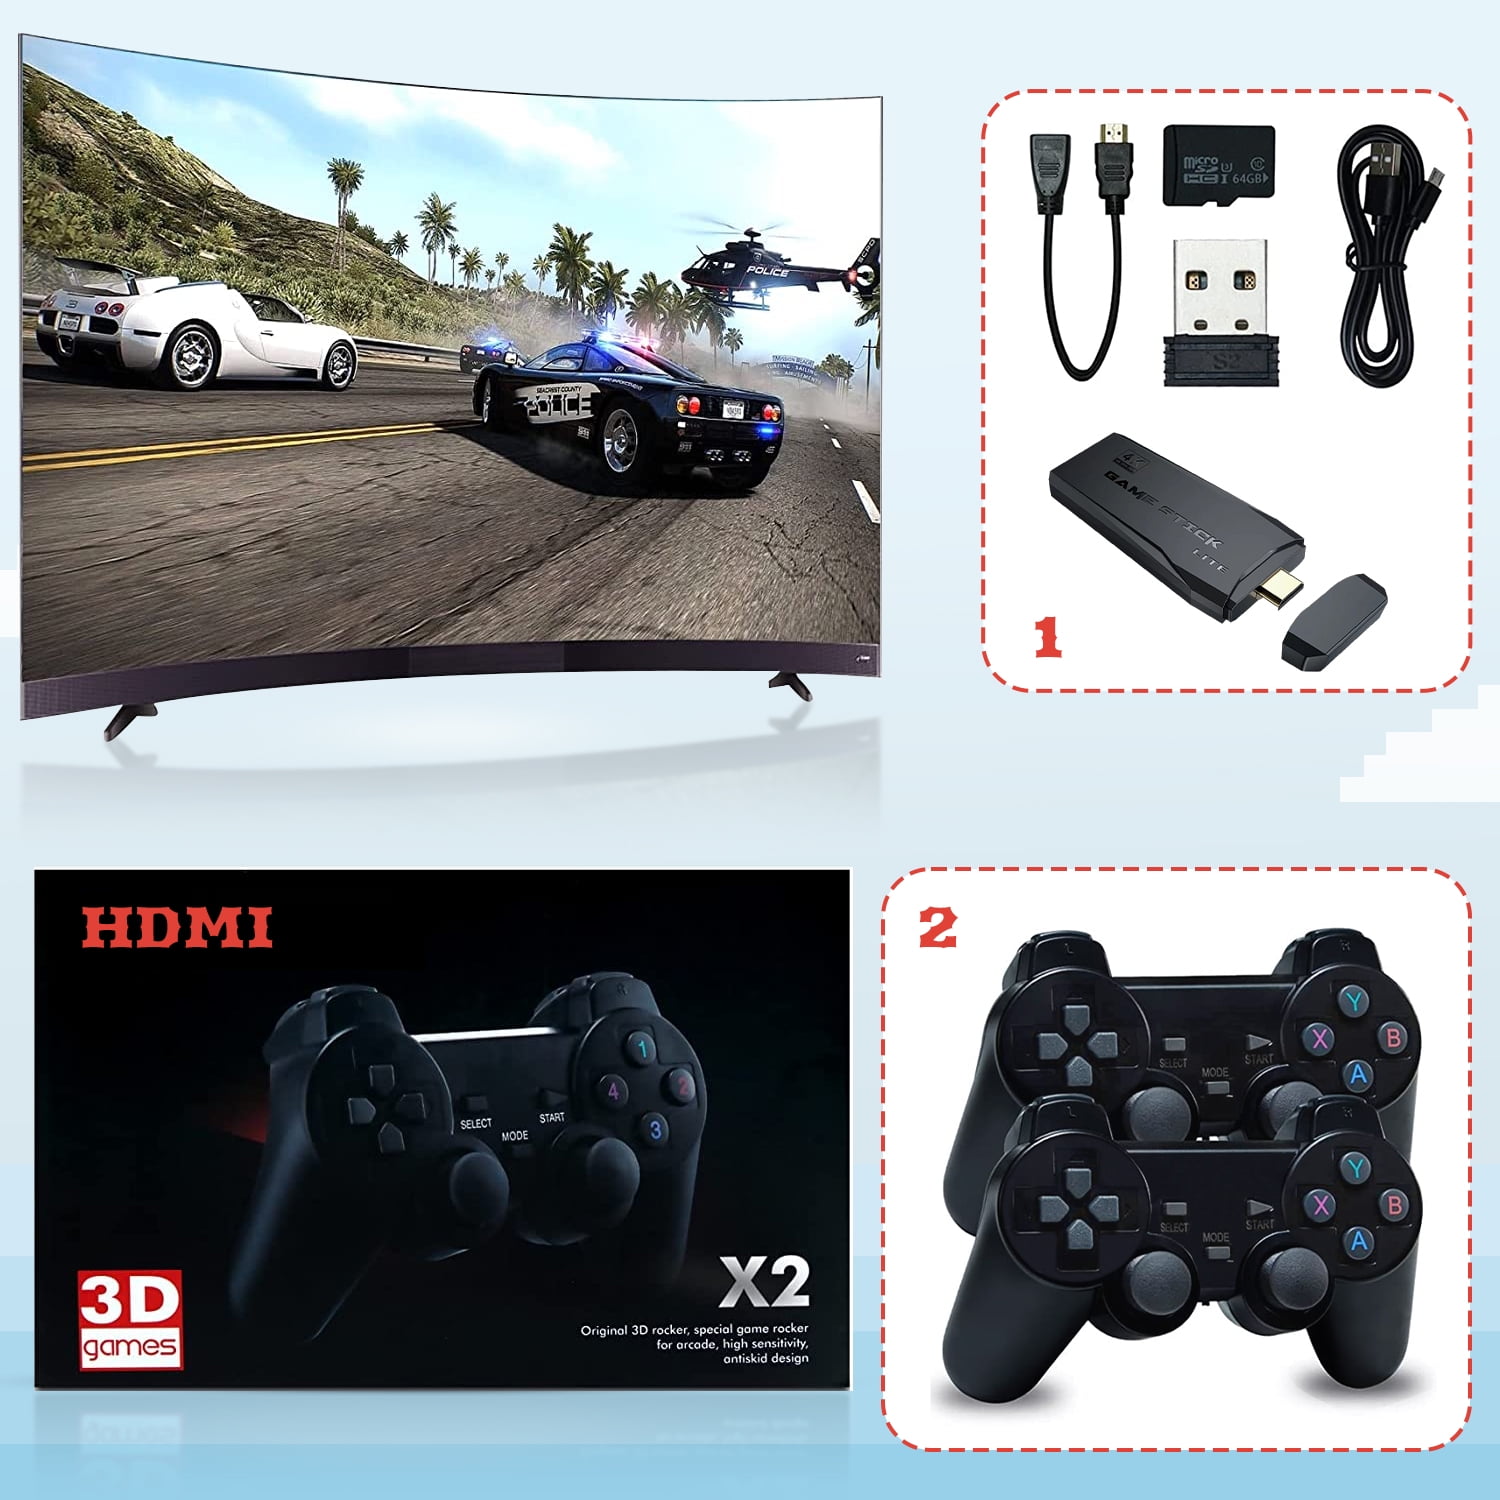 HAIHUANG PAPI Retro Game Console with 64G TF Card 5200 Classic Games Speed  FPS 1:1 Output,Handheld Game Console Supports 1280*720p 60HZ ,Portable Game